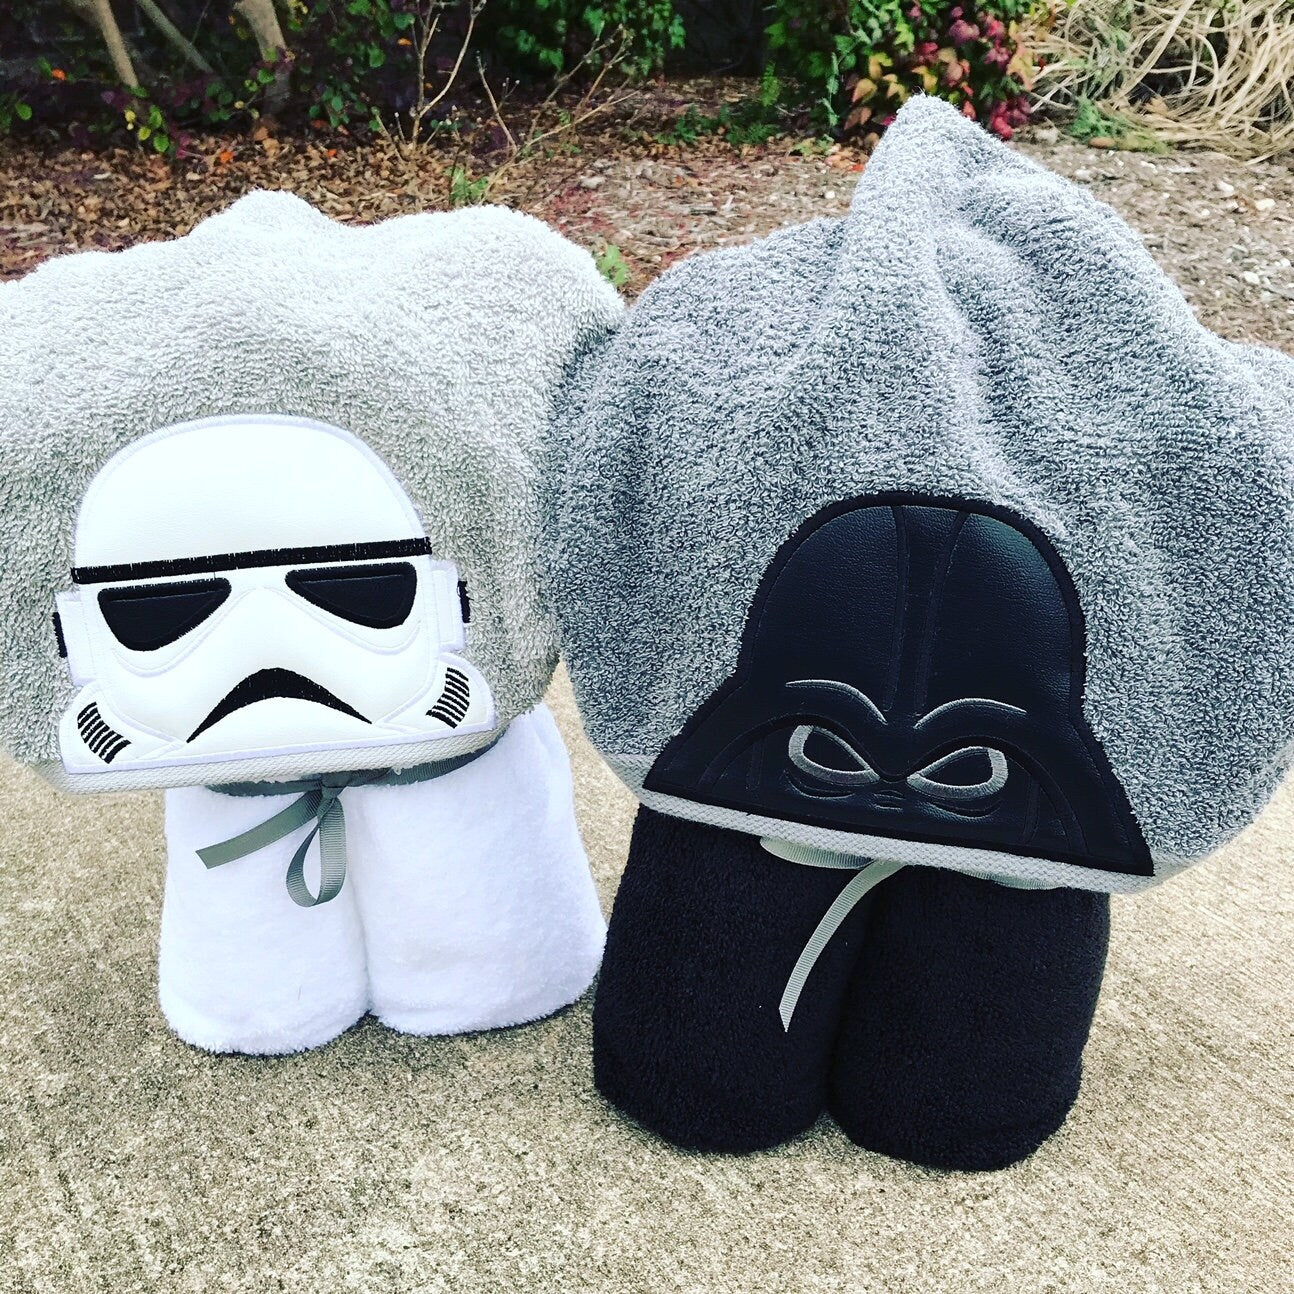 Darth Vador and/or Storm Trooper Inspired Hooded Towel for kids, Large Kids Hooded Towel, Character Hooded towel